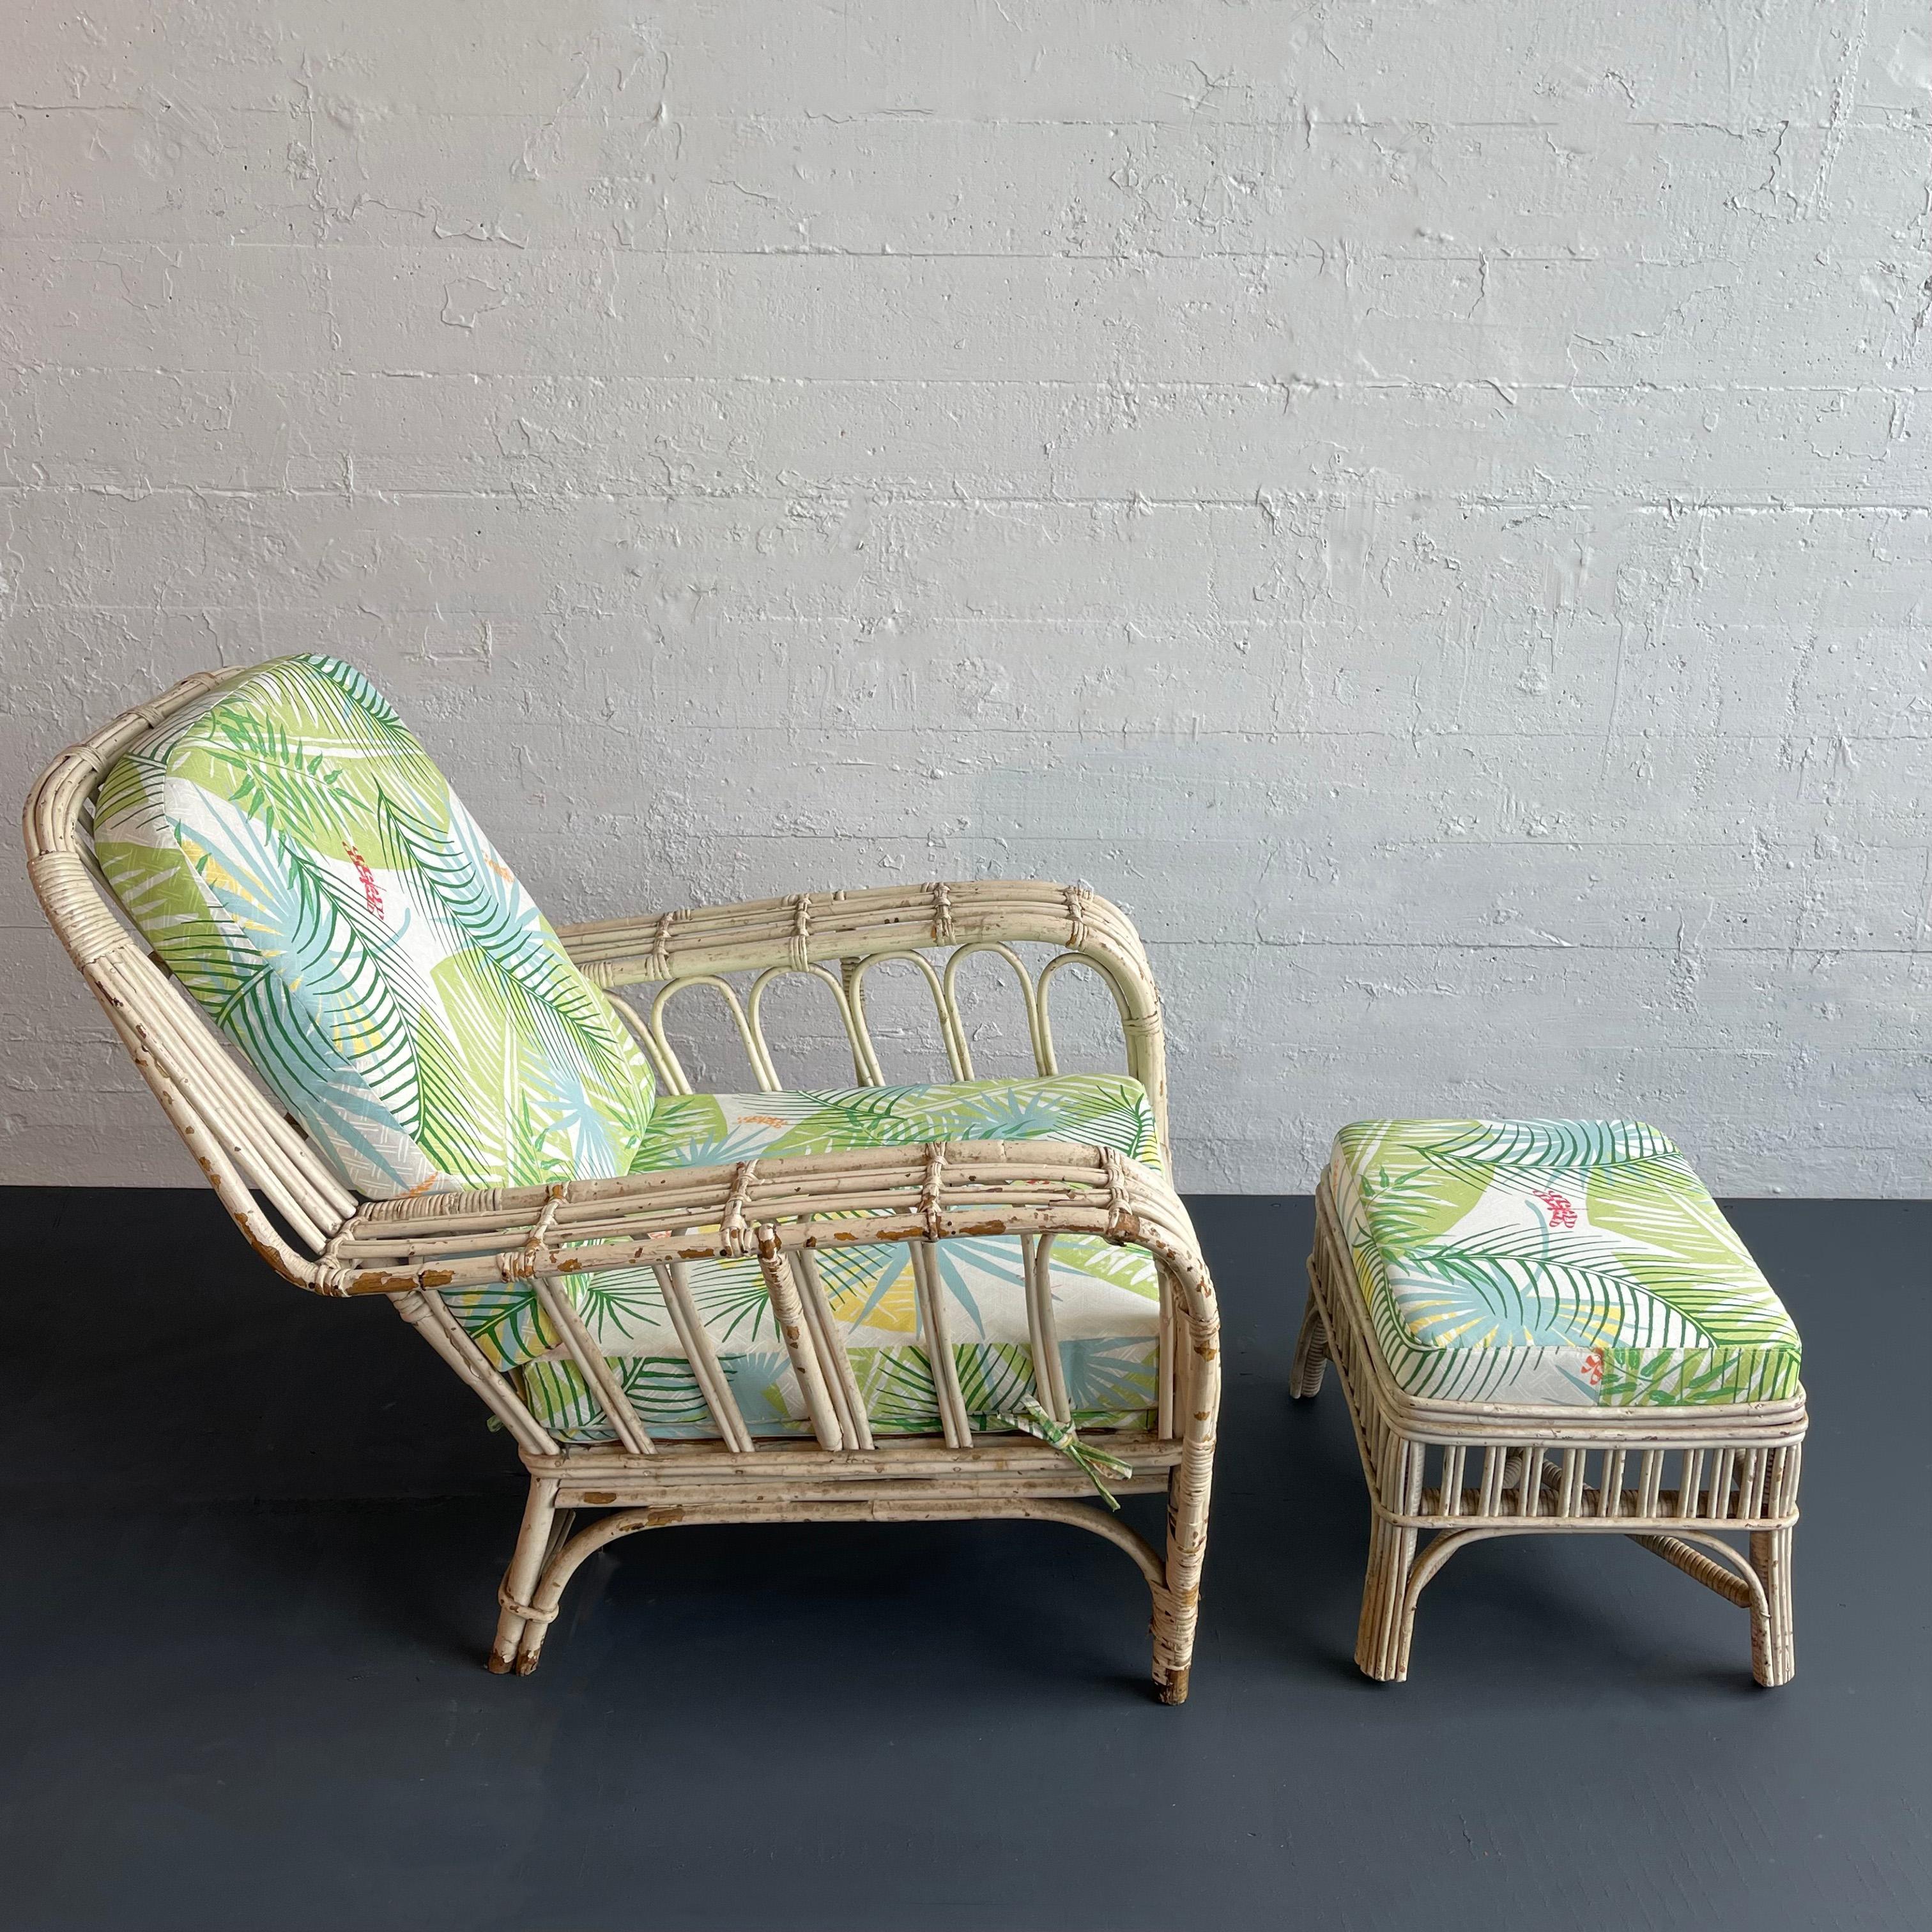 20th Century Mid-Century White Wash Wicker Cushioned Lounge Chair And Ottoman For Sale